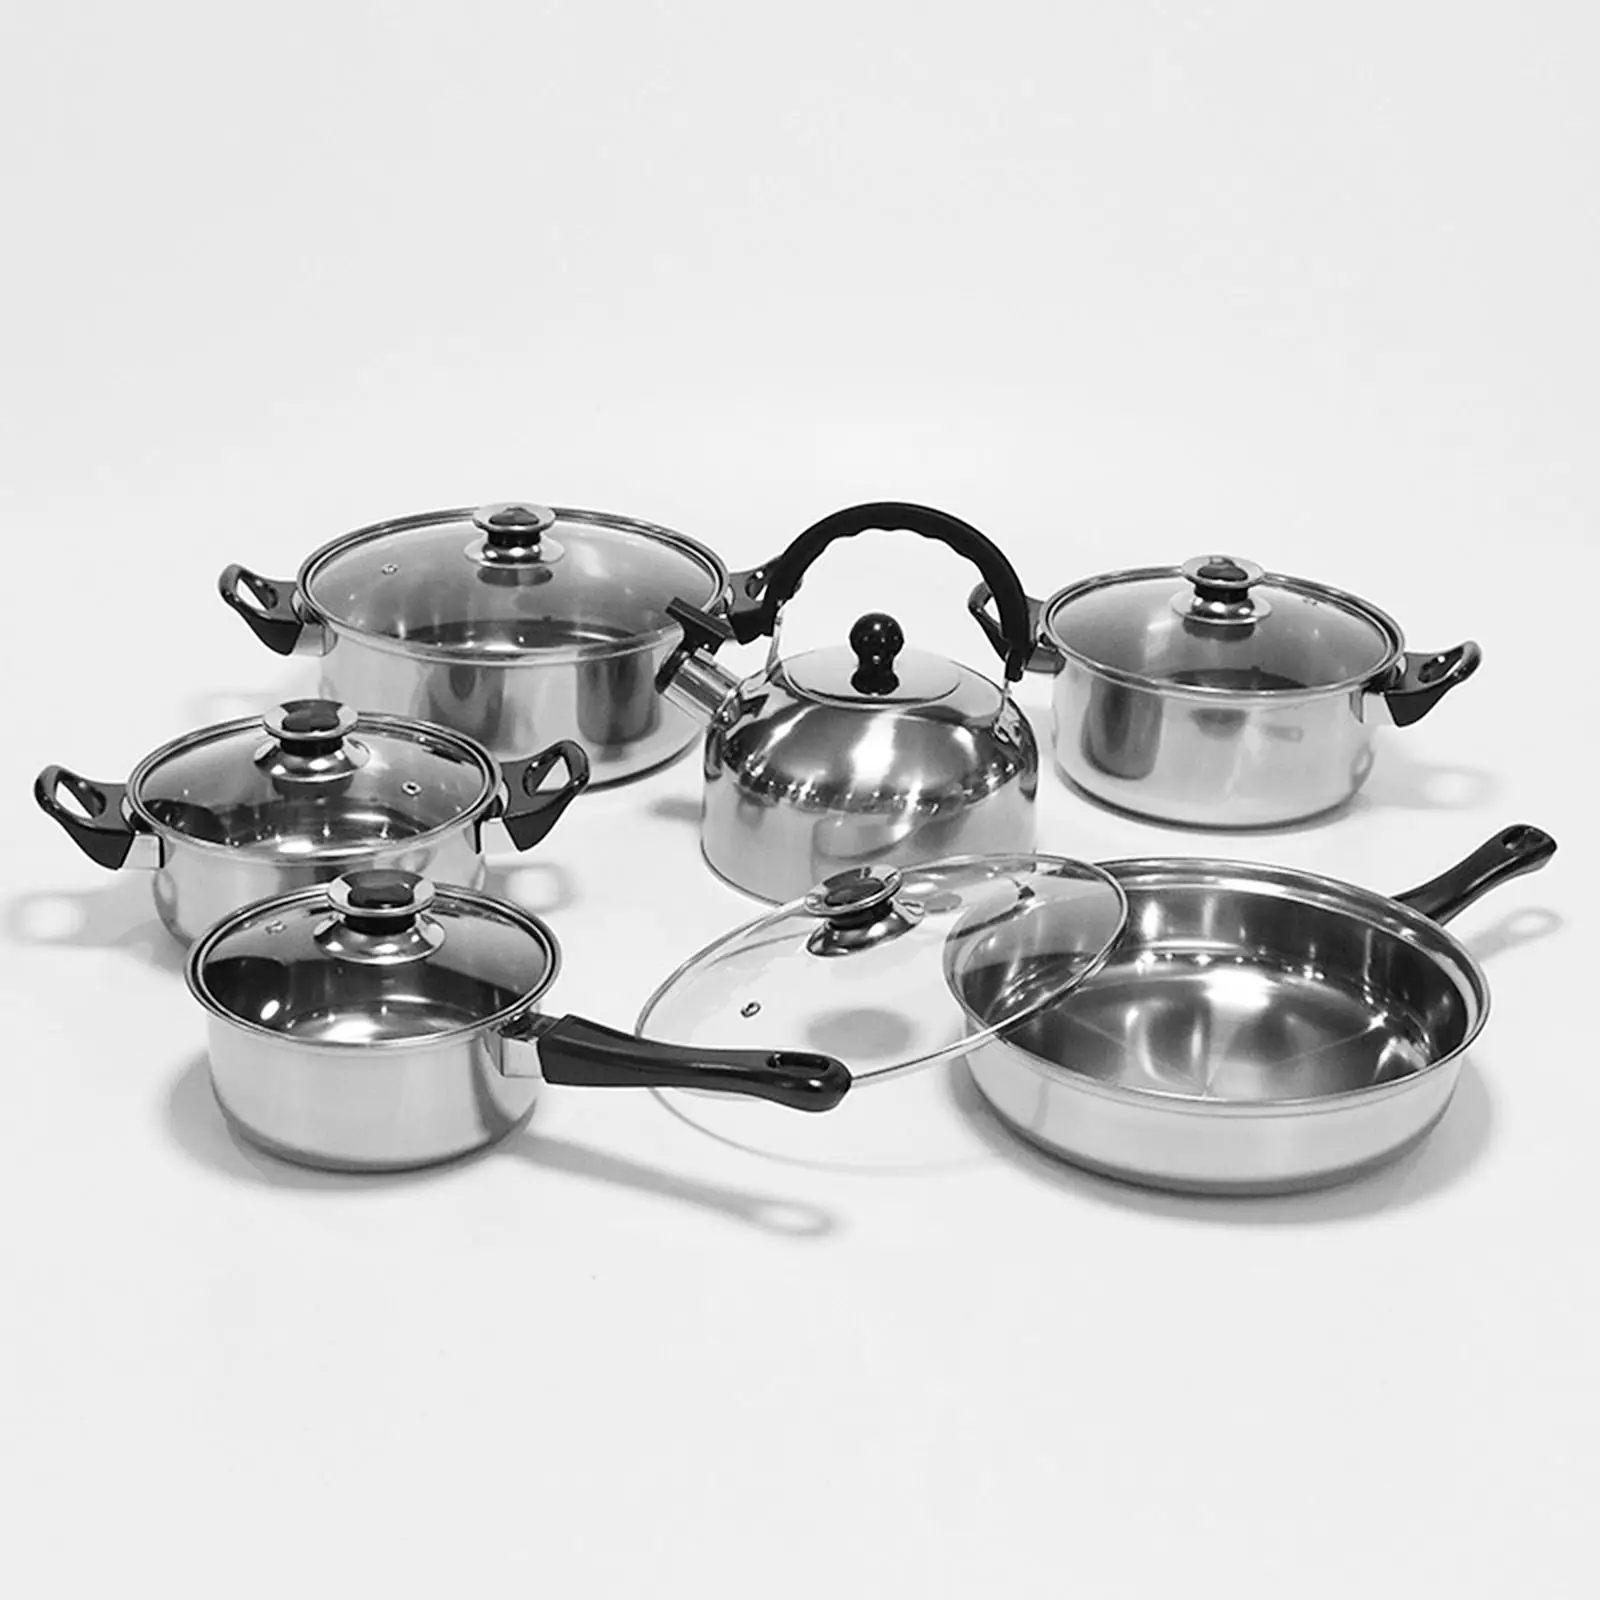 Home Kitchen Cookware Sets Pasta Pot Comfortable Grip Saucepan Soup Pot with Lid for Kitchen Camping Indoor Hiking Boiling Soups